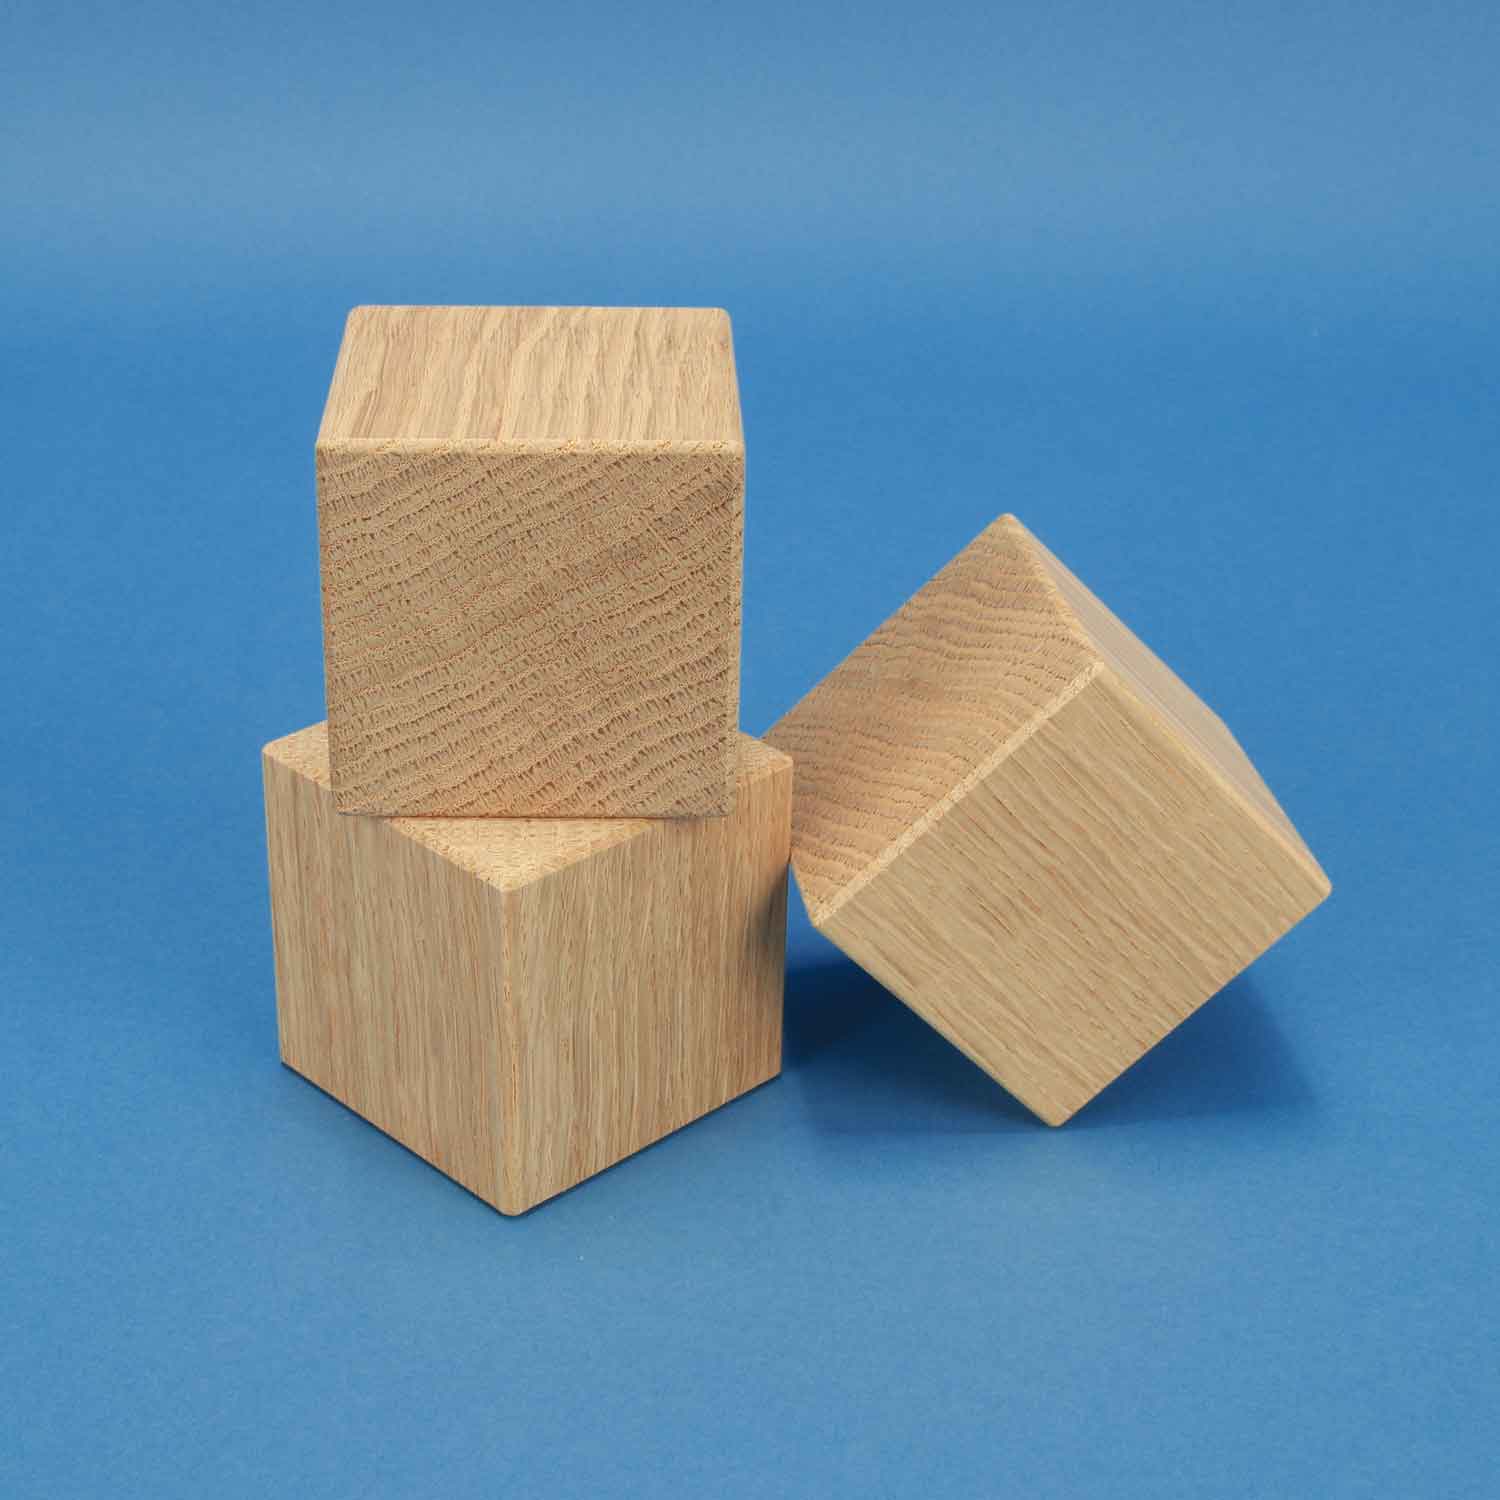 Wooden cubes and dices made of beech, maple, oak and walnut